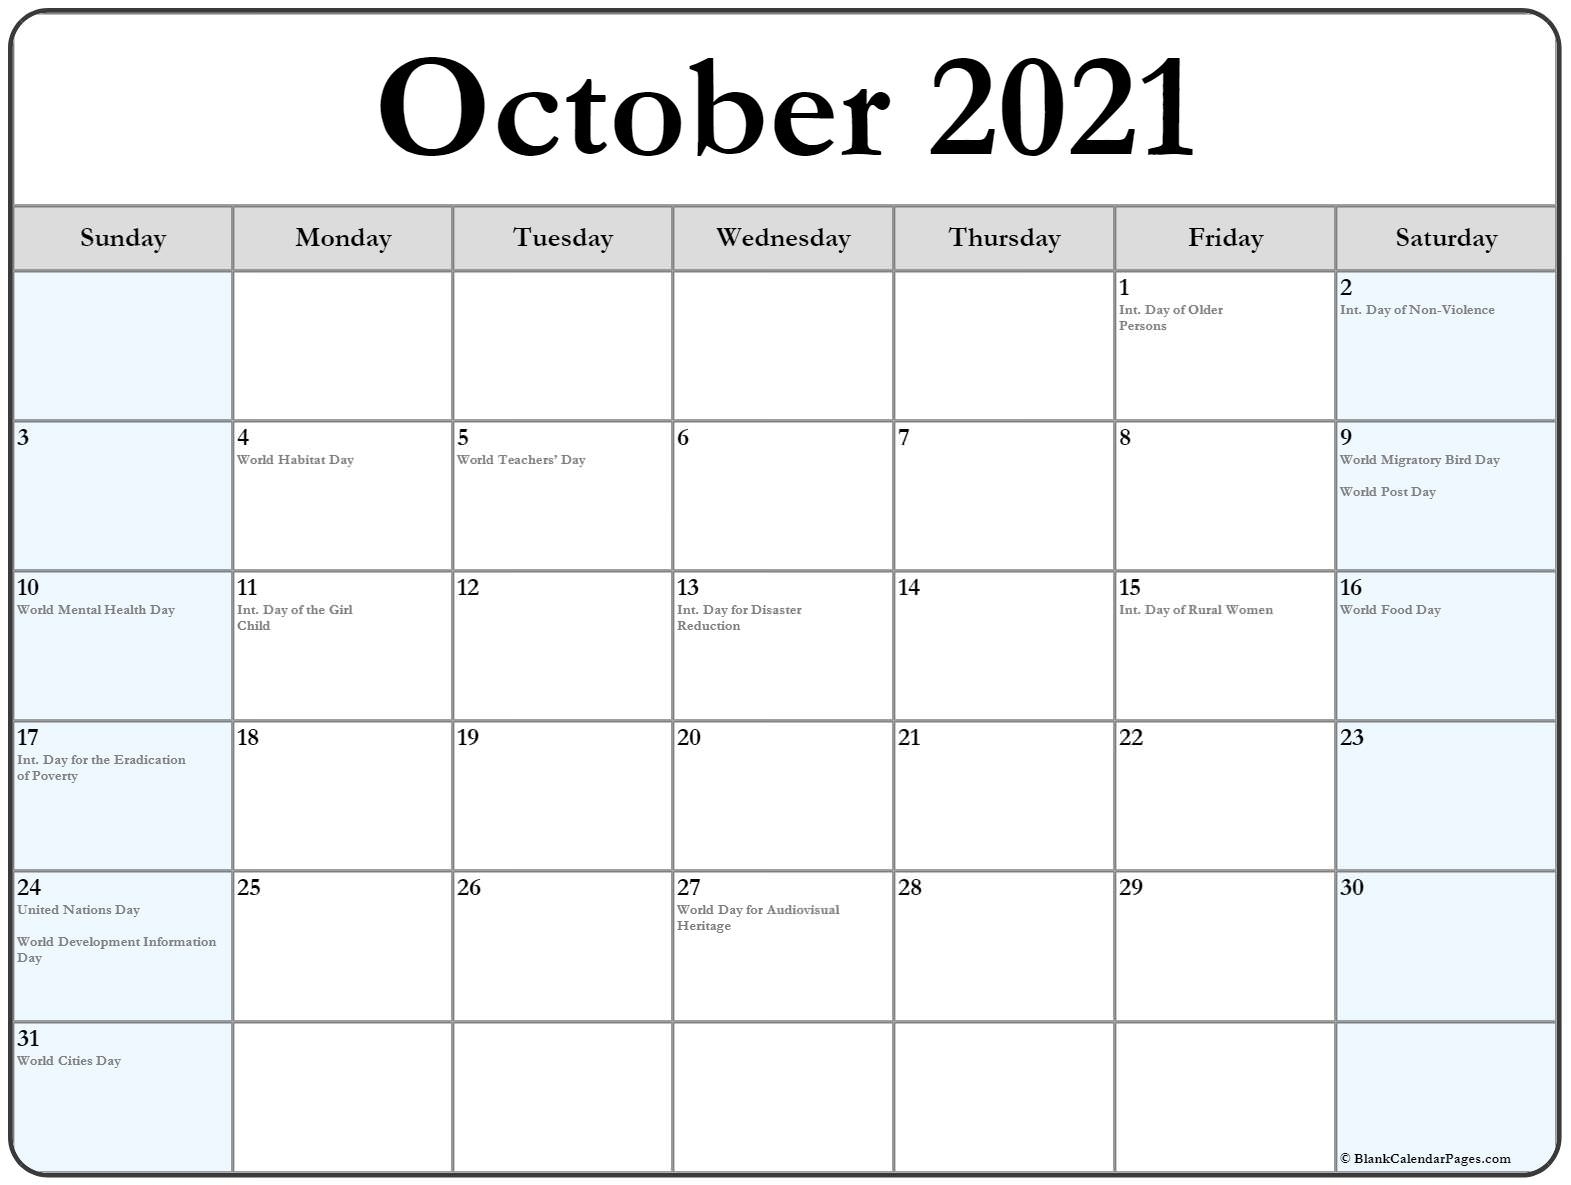 Free Printable October 2021 Calendar With Holidays | Printable Calendar October 2021 Lunar Calendar